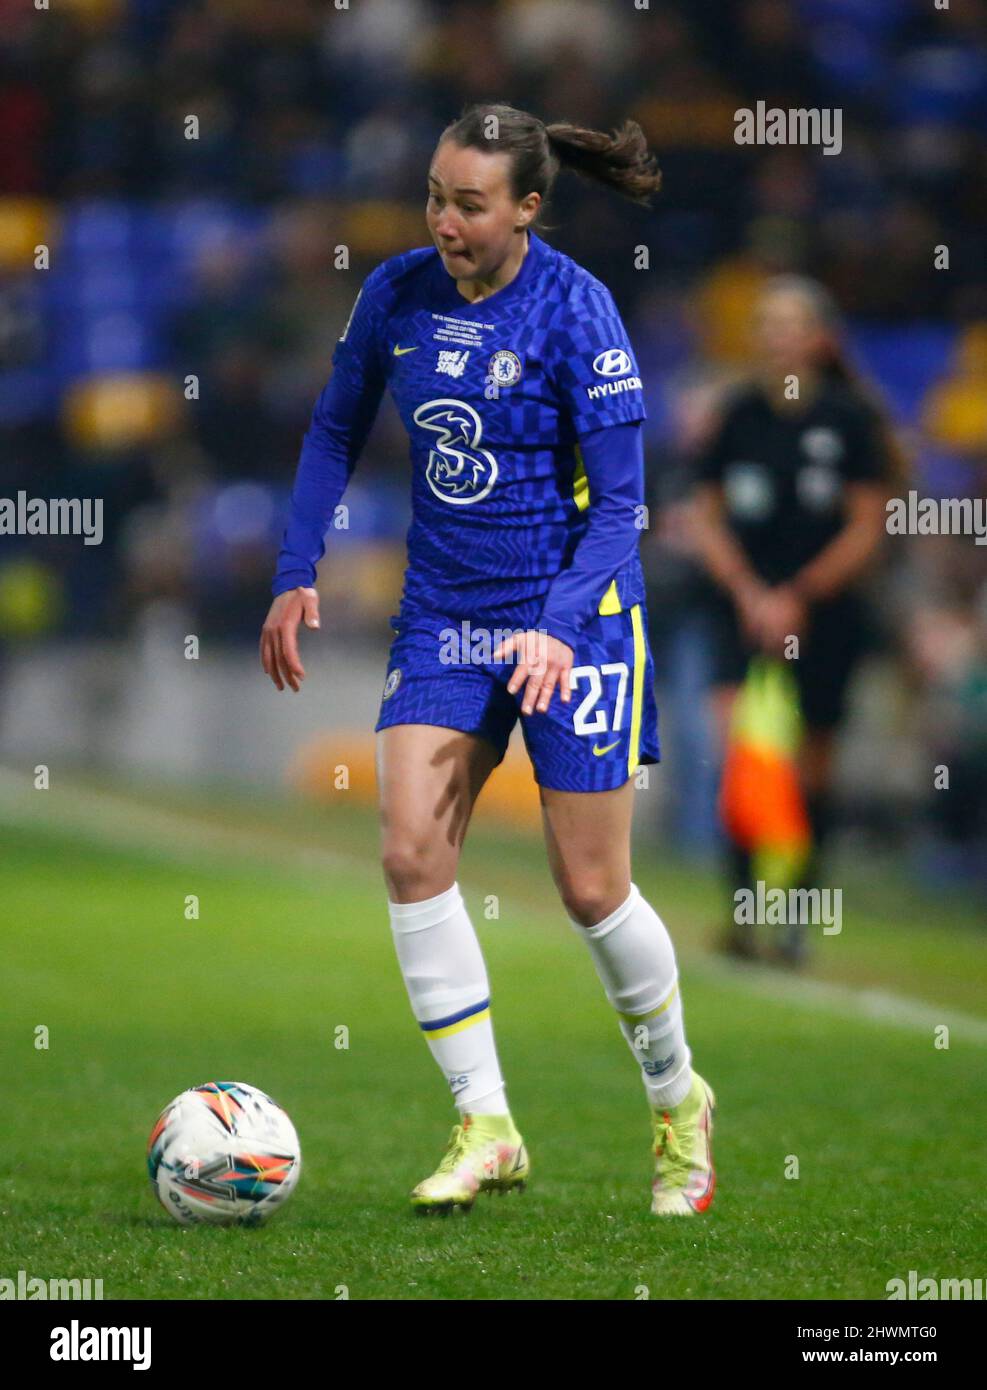 WIMBLEDON, United Kingdom, MARCH 05: Alsu Abdullina of Chelsea Women during The FA Women's Continental Tyre League Cup Final 2022 between Chelsea and Stock Photo